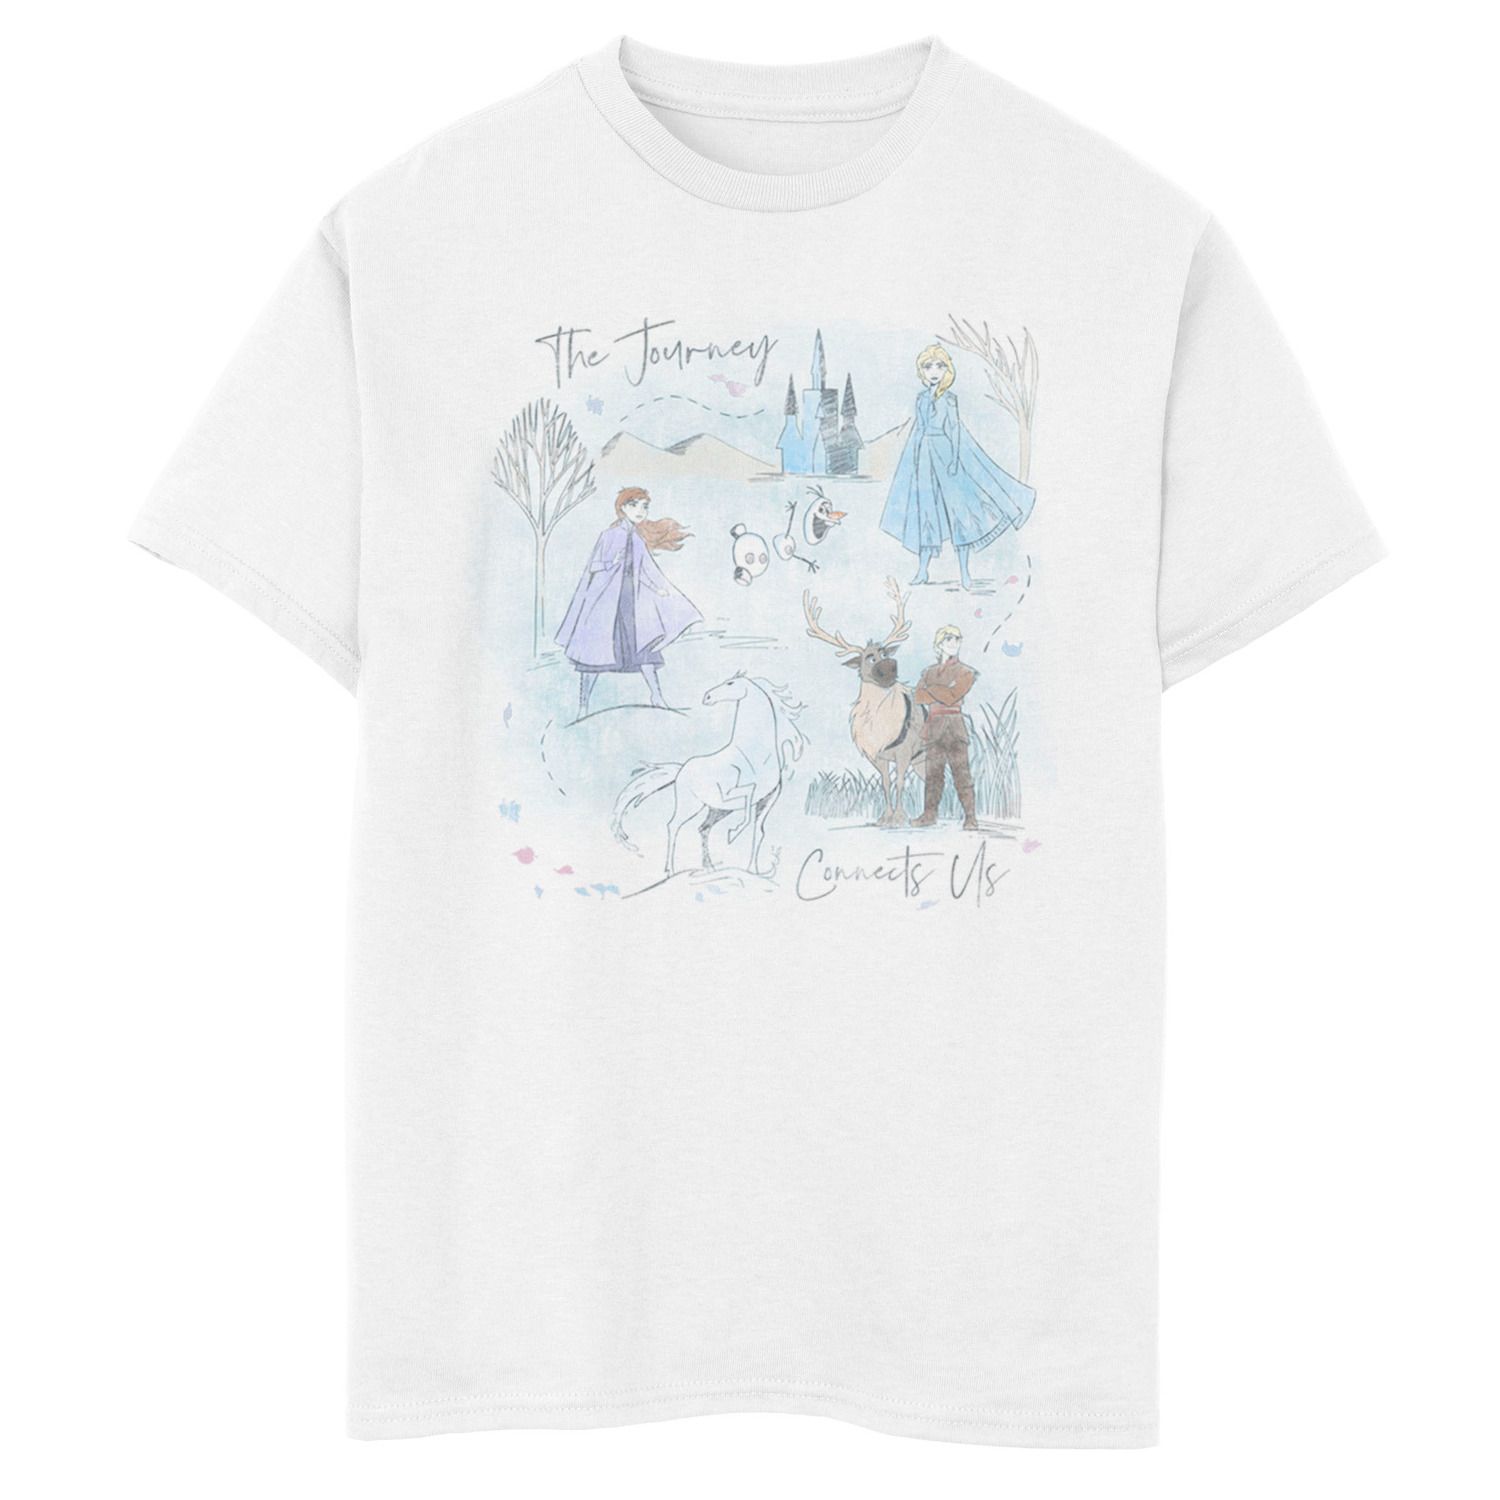 Image for Disney 's Frozen 2 Boys 8-20 Sketched Watercolor Poster Graphic Tee at Kohl's.